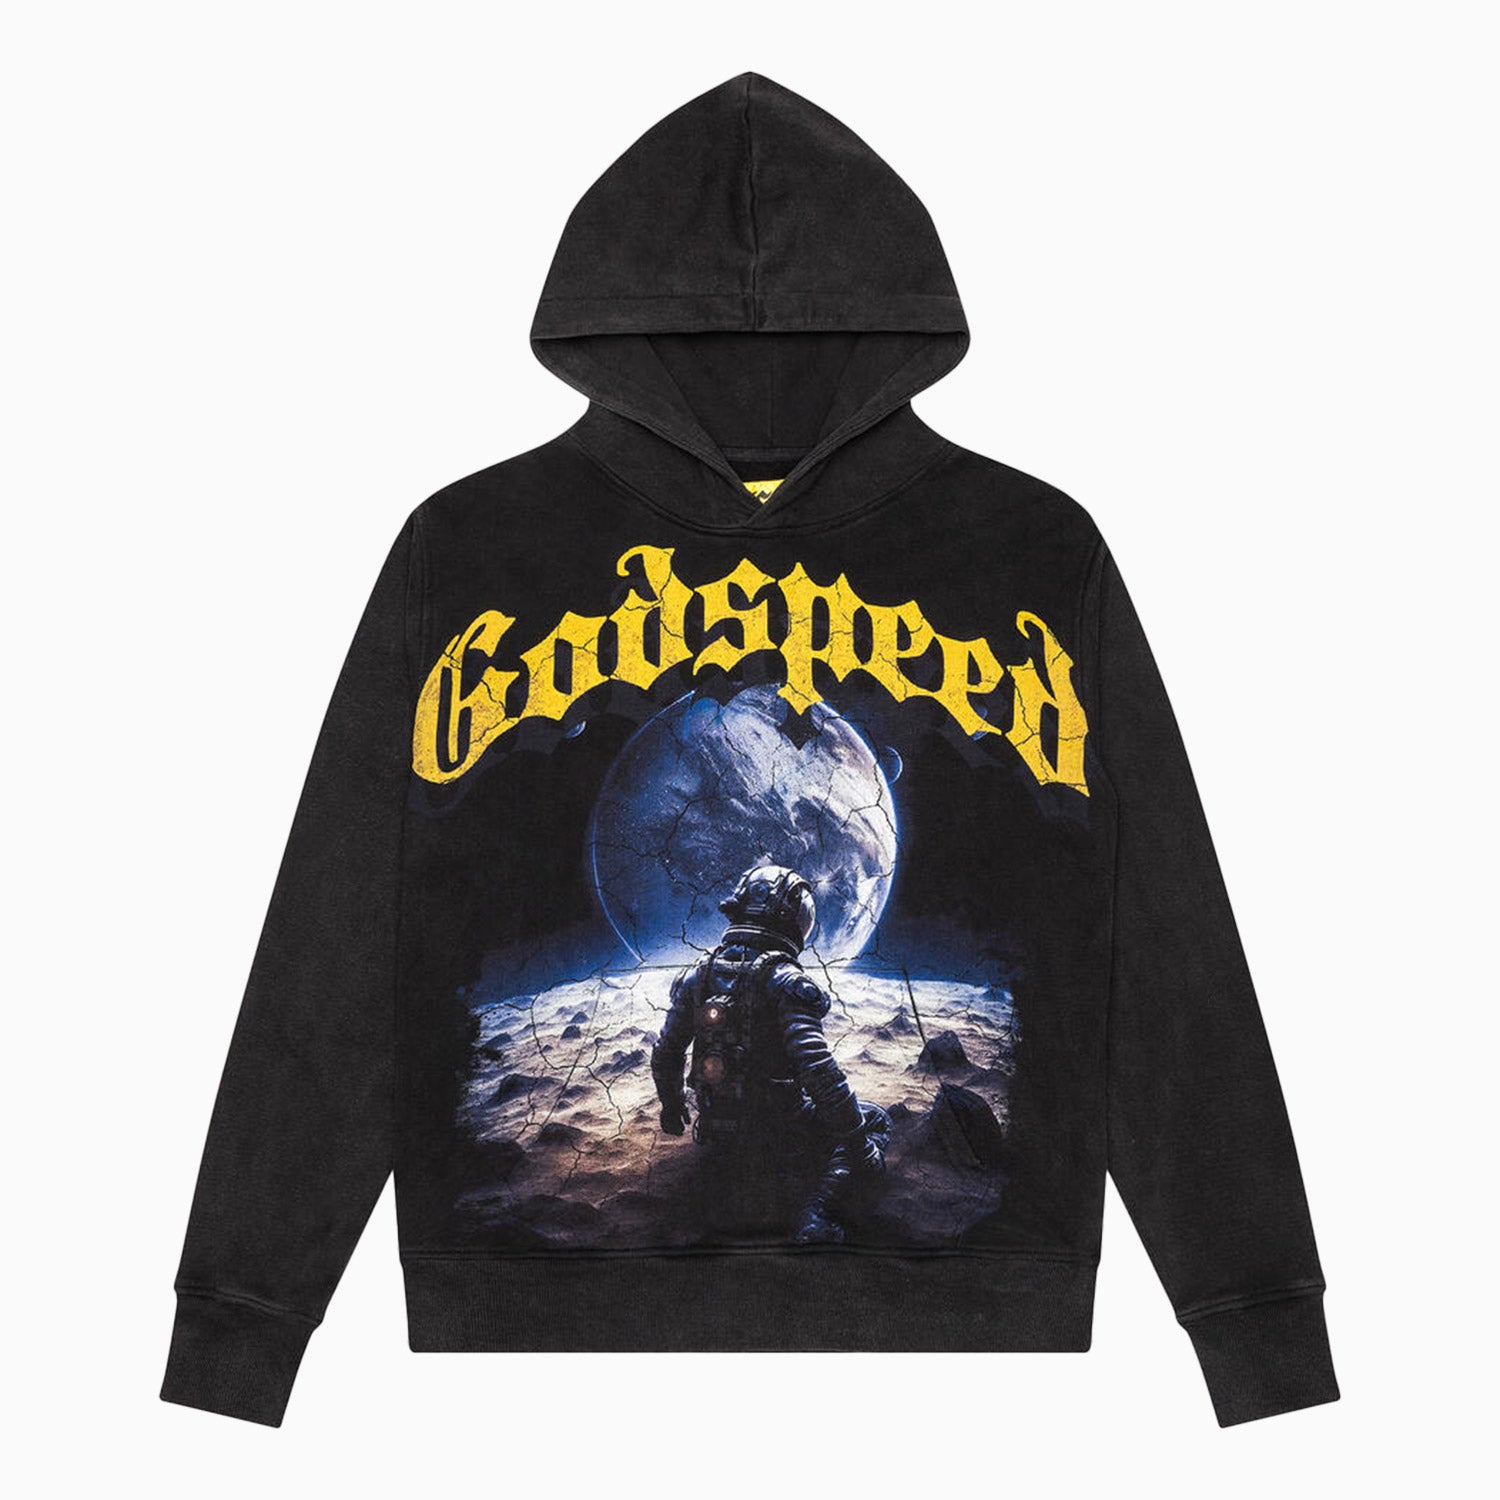 godspeed-mens-no-looking-back-pull-over-hoodie-9676240-blkylw